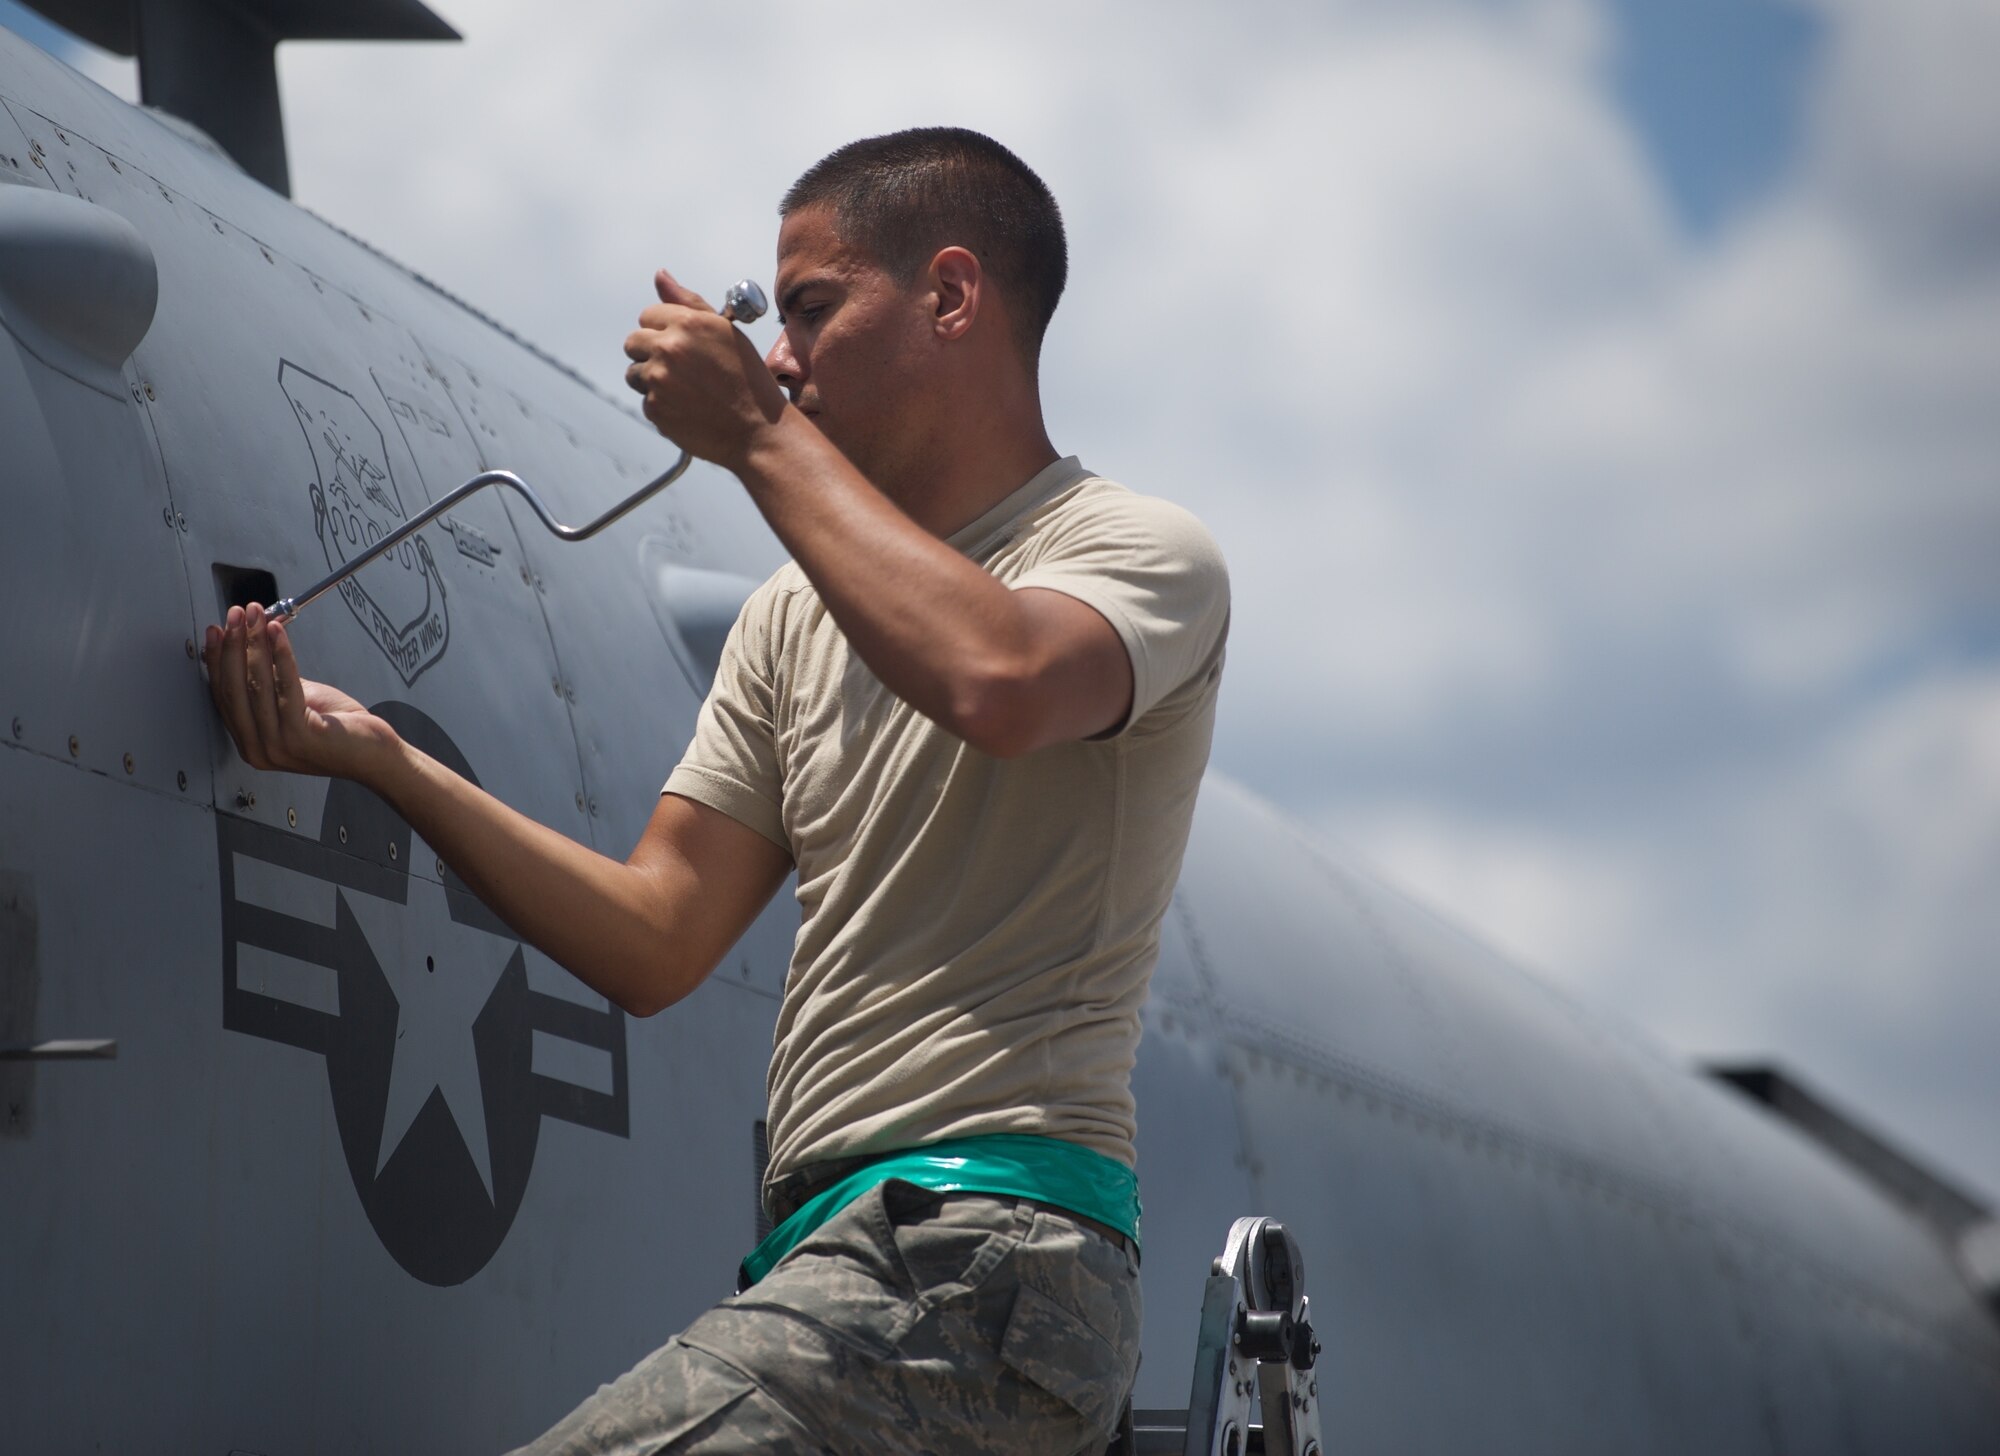 U.S. Air Force Staff Sgt. Eric Rister, an avionics technician deployed from Osan Air Base, Republic of Korea, unscrews a panel on an A-10C Thunderbolt II after the aircraft completed a mission flying in the vicinity of Scarborough Shoal April 21, 2016. The aircraft can be serviced and operated from bases with varied facilities, additionally; many of its parts are interchangeable left and right, including the engines, main landing gear and vertical stabilizers. These unique aspects of the aircraft allow the aircrew and maintainers to deploy with minimal equipment and still ensure the jets are ready to fly missions out of Clark AB at a moment’s notice, exercising the rights of freedom of navigation in international waters and international airspace. (U.S. Air Force photo by Capt. Susan Harrington)